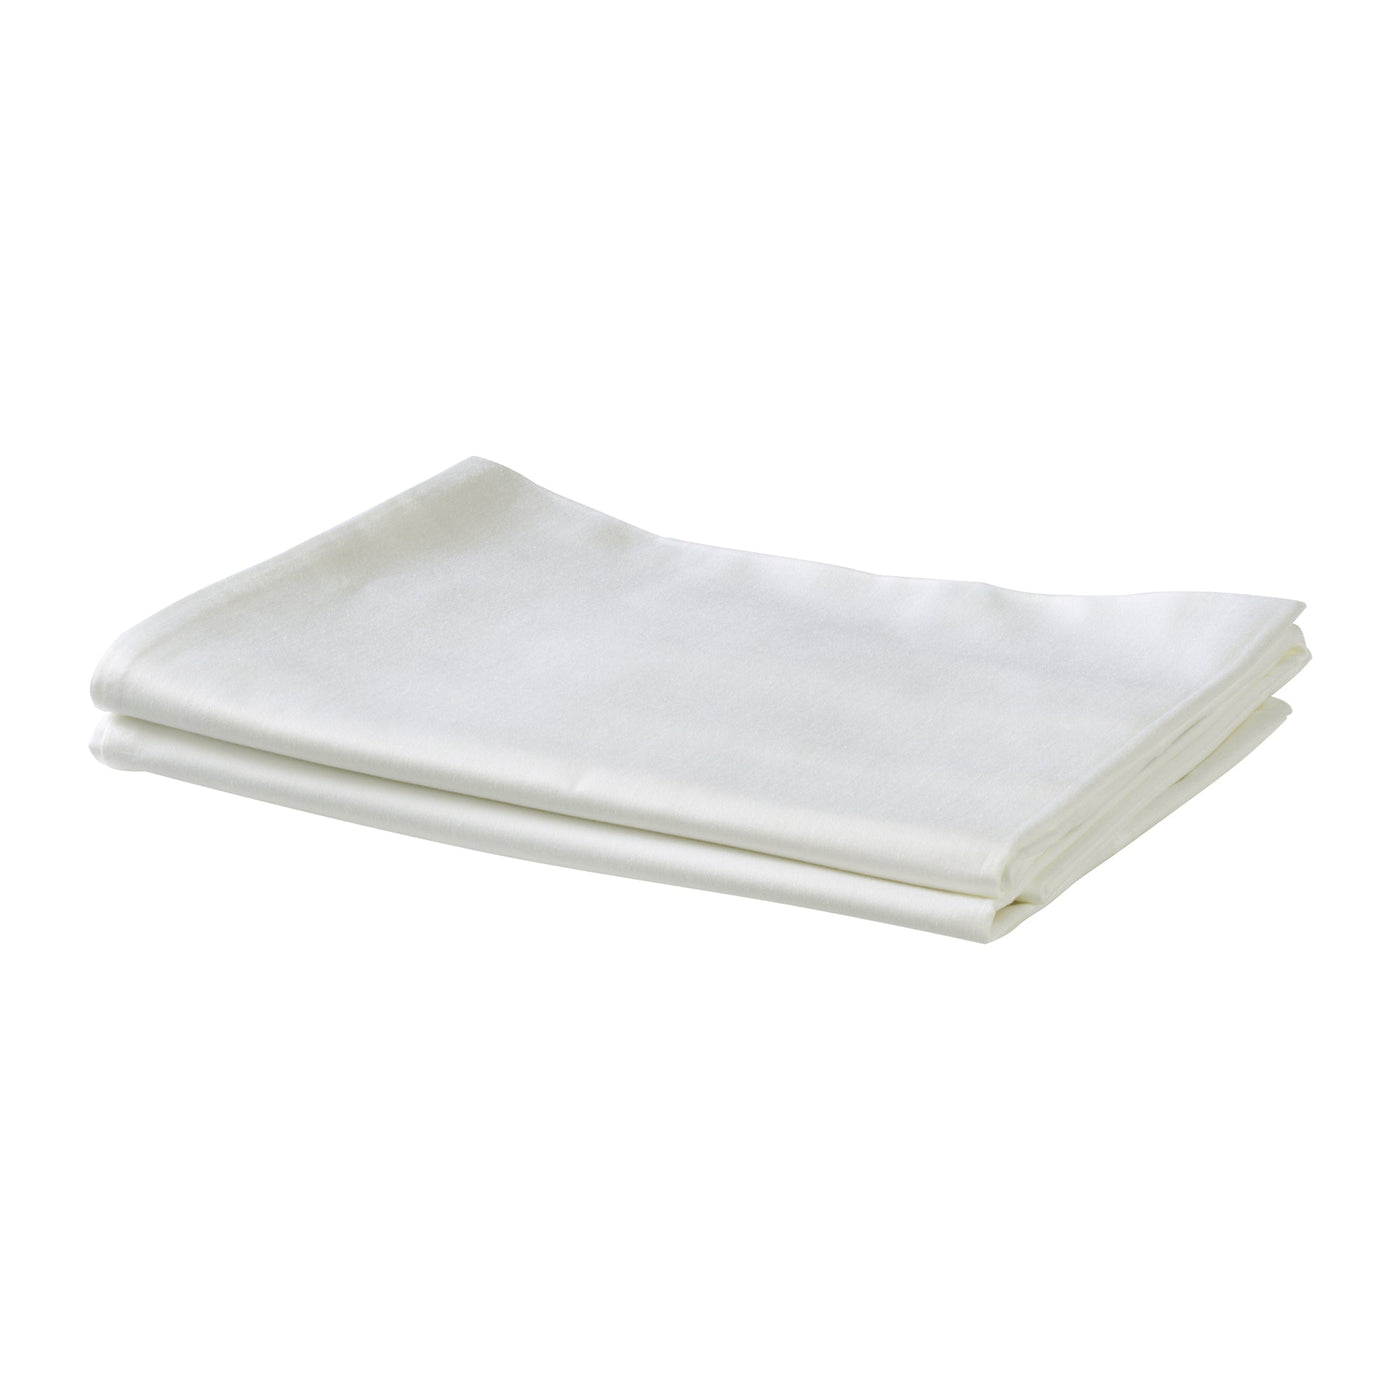 Bamboo Cotton Luxury Pillowcase - Made with Viscose from Bamboo - mysleepscience.com